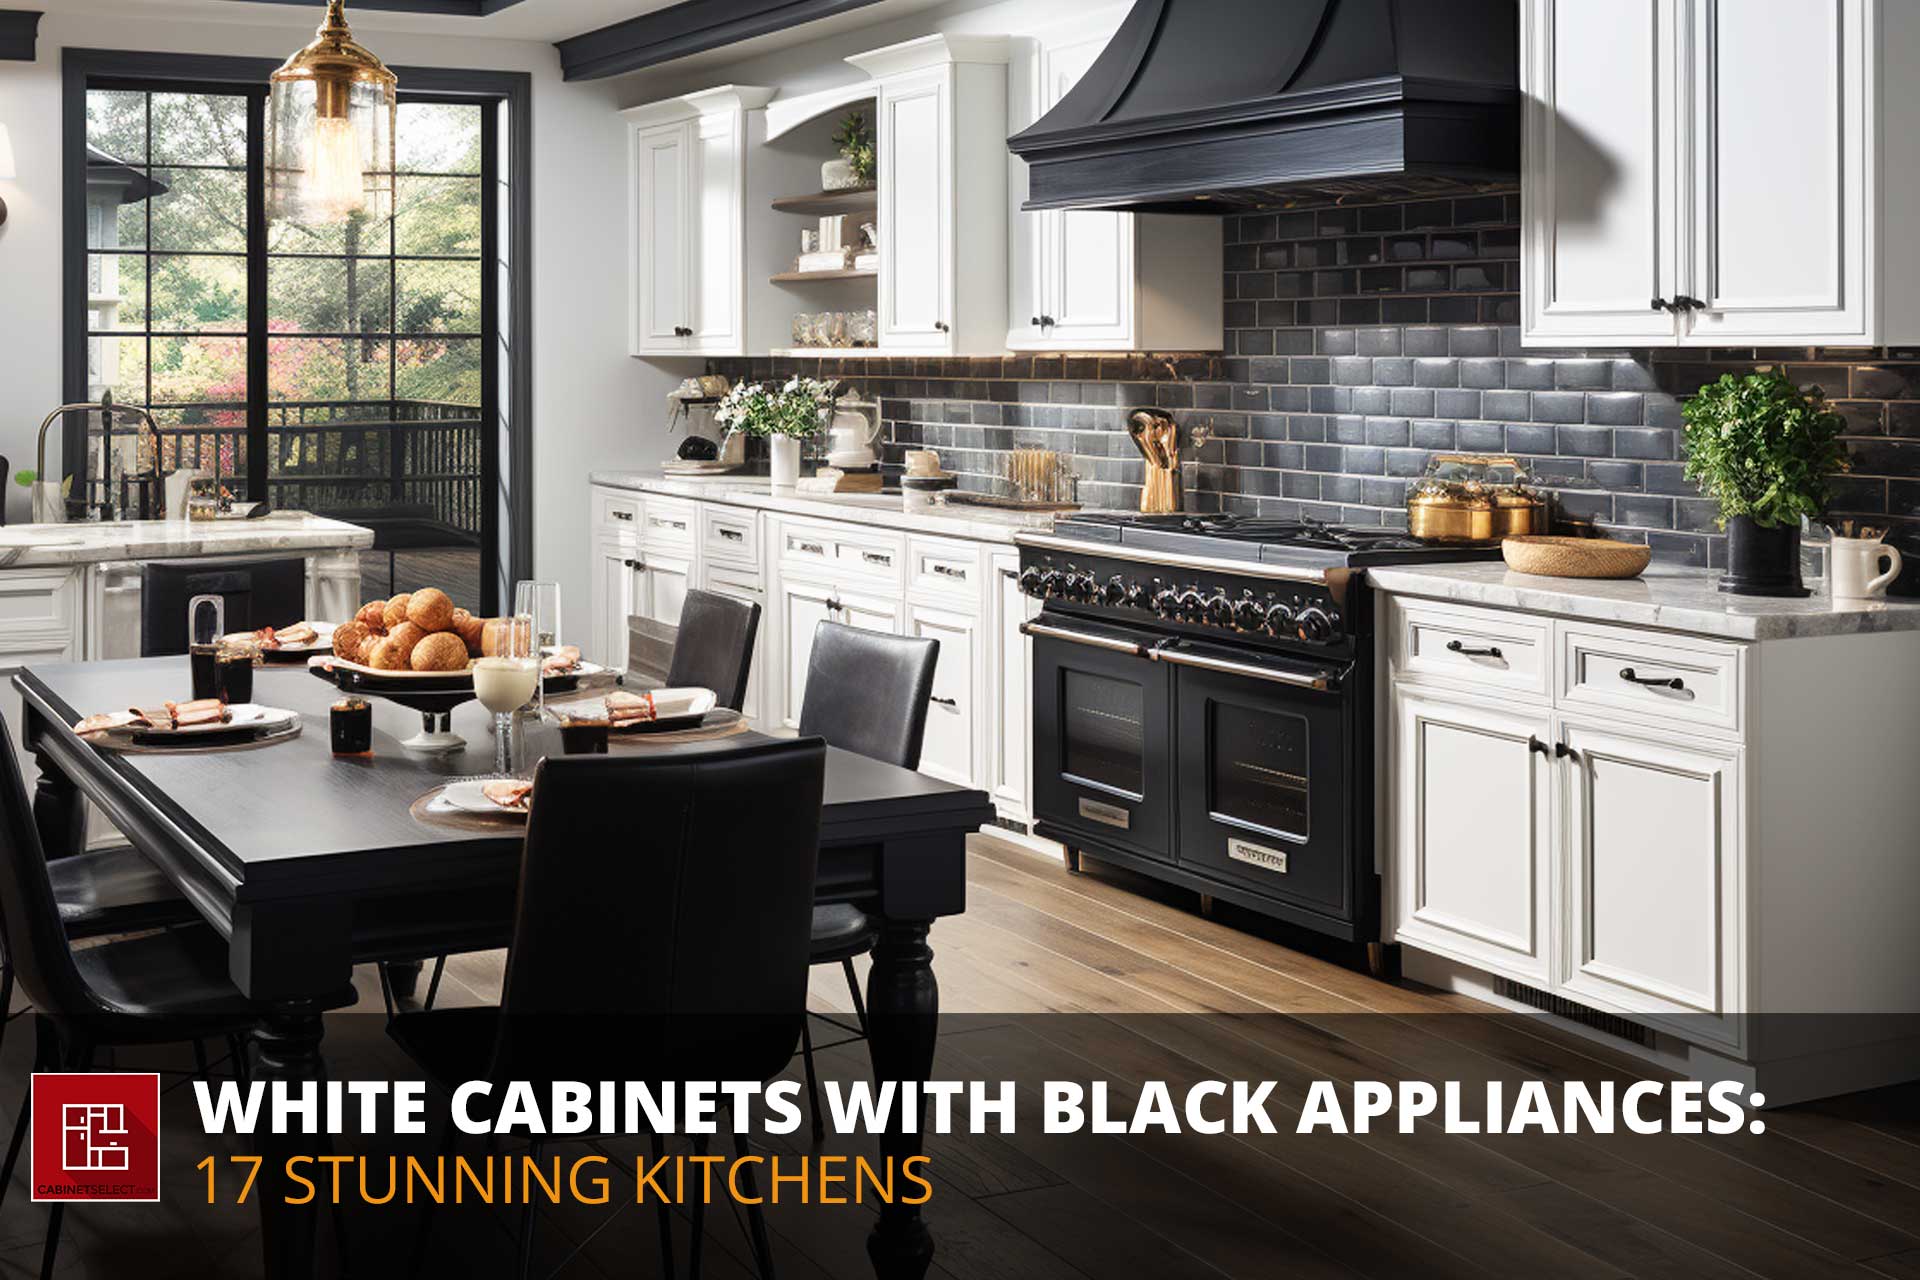 How to decorate a kitchen with black appliances